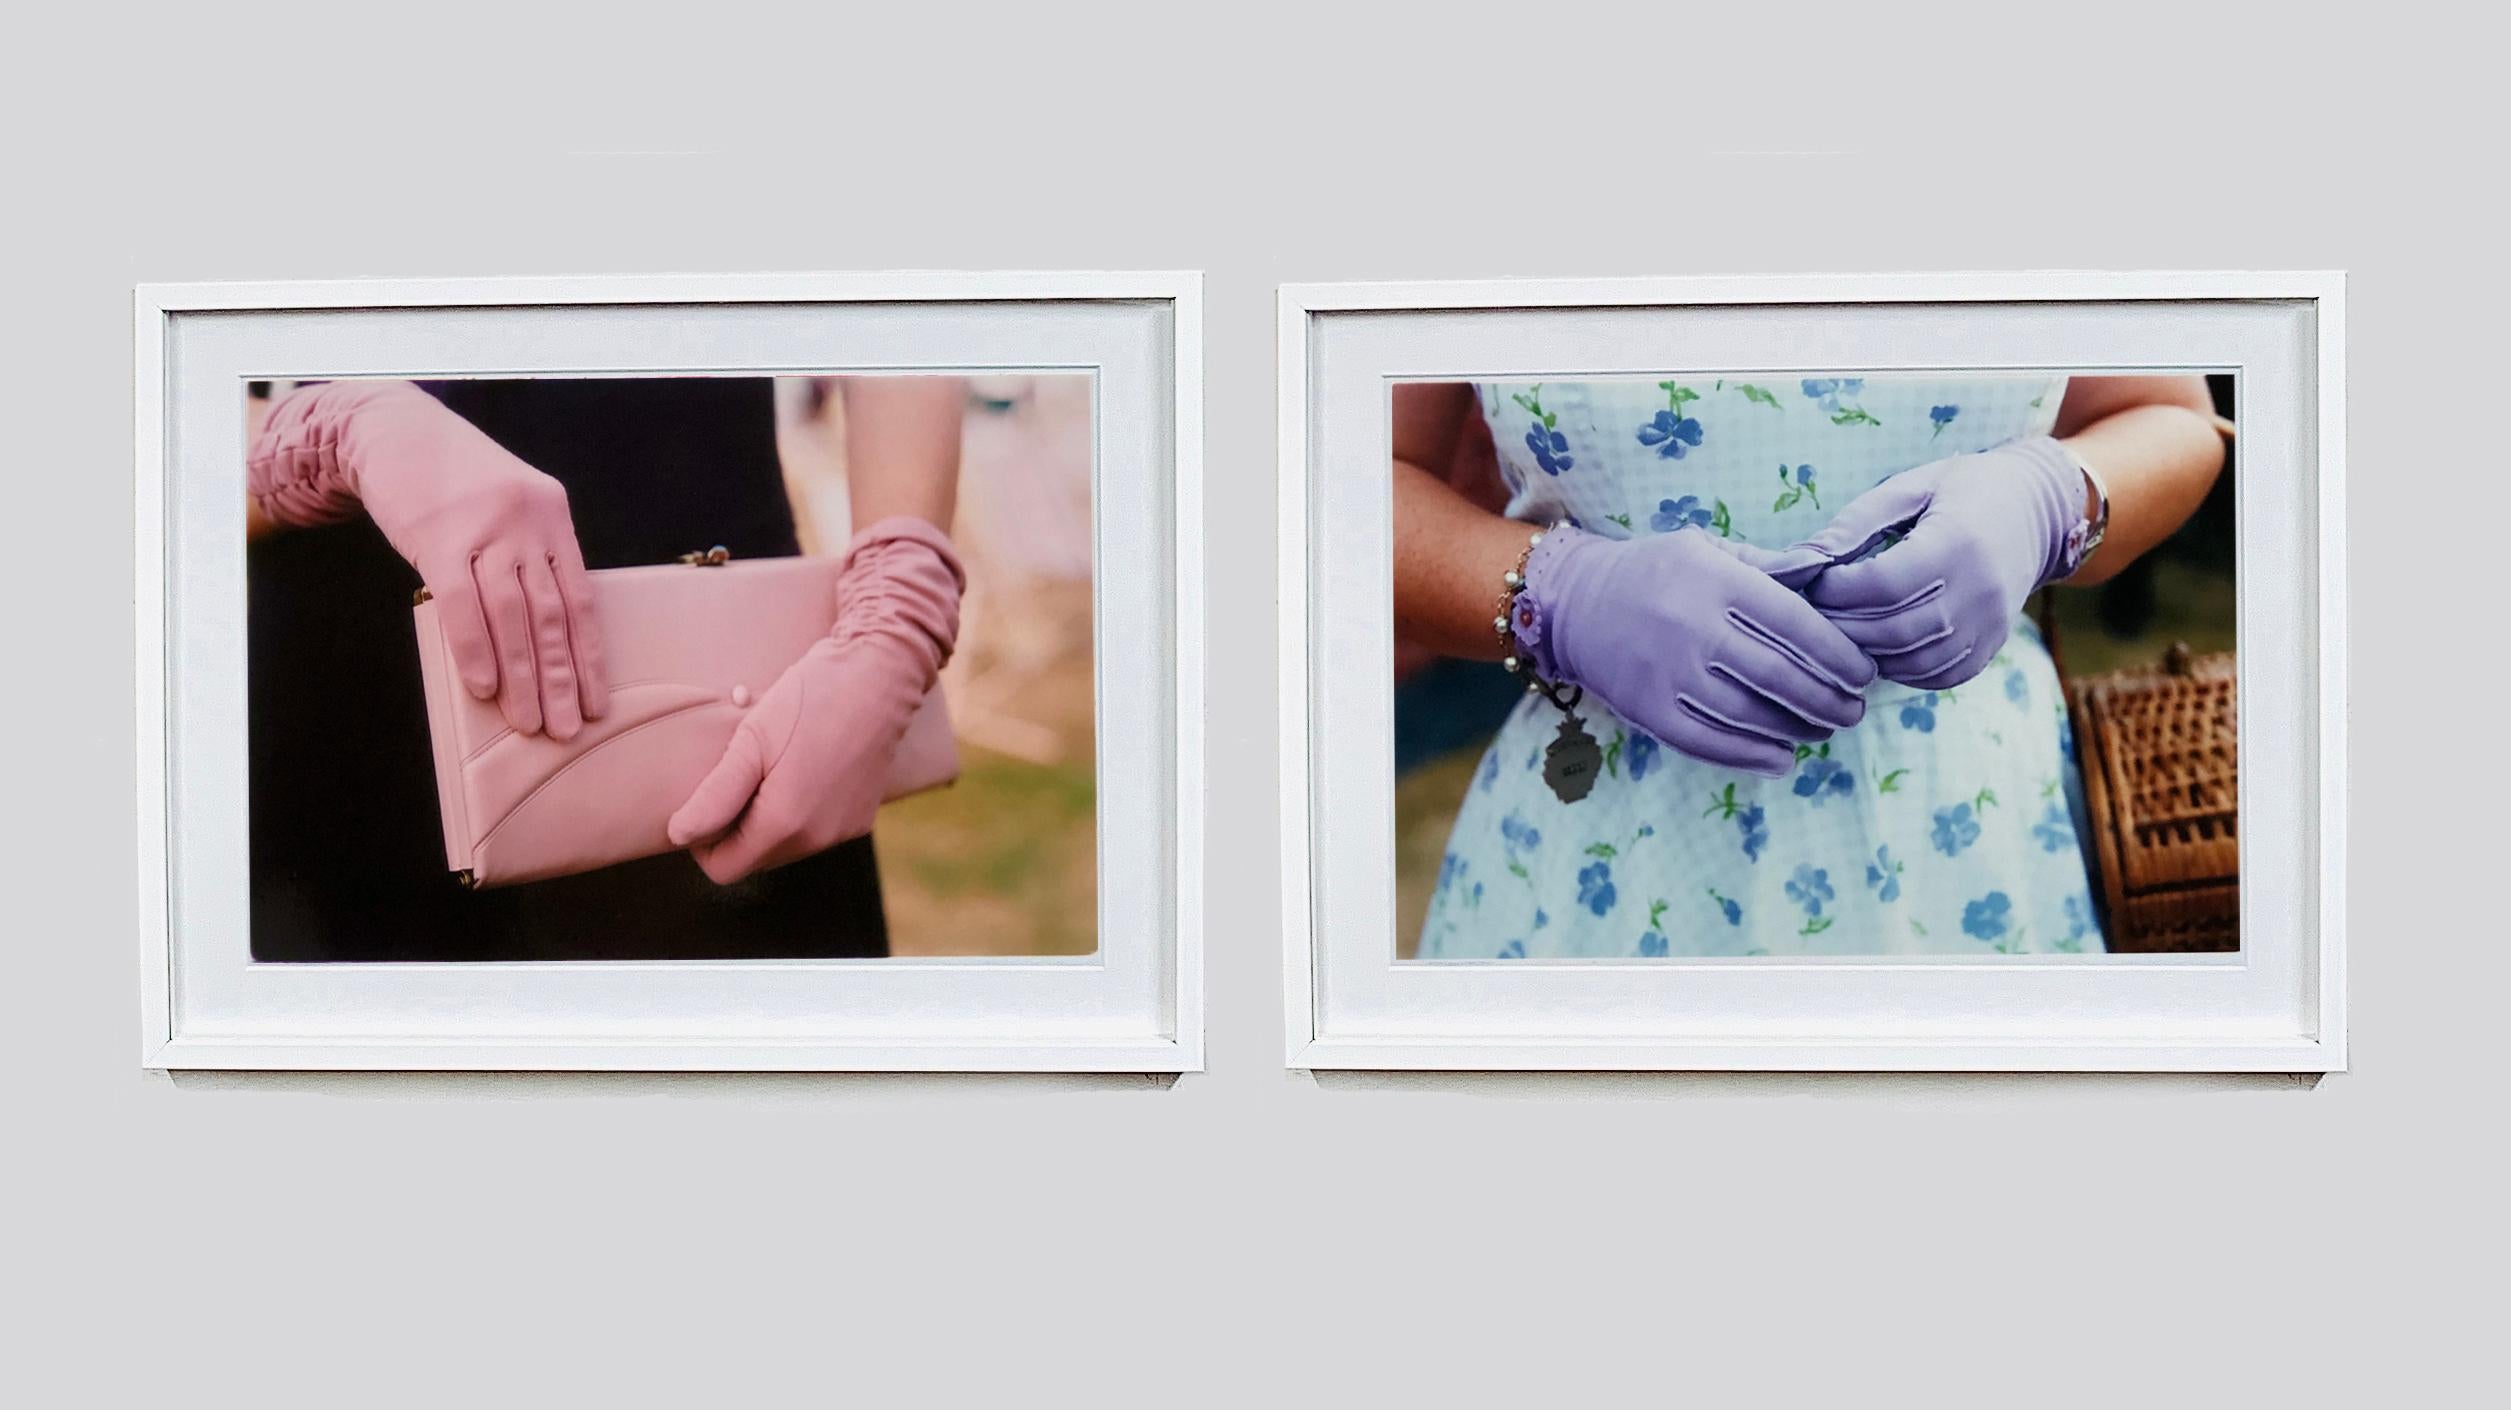 This stylish artwork, 'Pink Gloves' taken at the glamorous retro event Goodwood Revival, perfectly captures feminine sophistication with a vintage vibe.
This artwork featured in Richard Heeps 2018-2019 exhibition WEMEN at Nhow Hotel Milan.

This